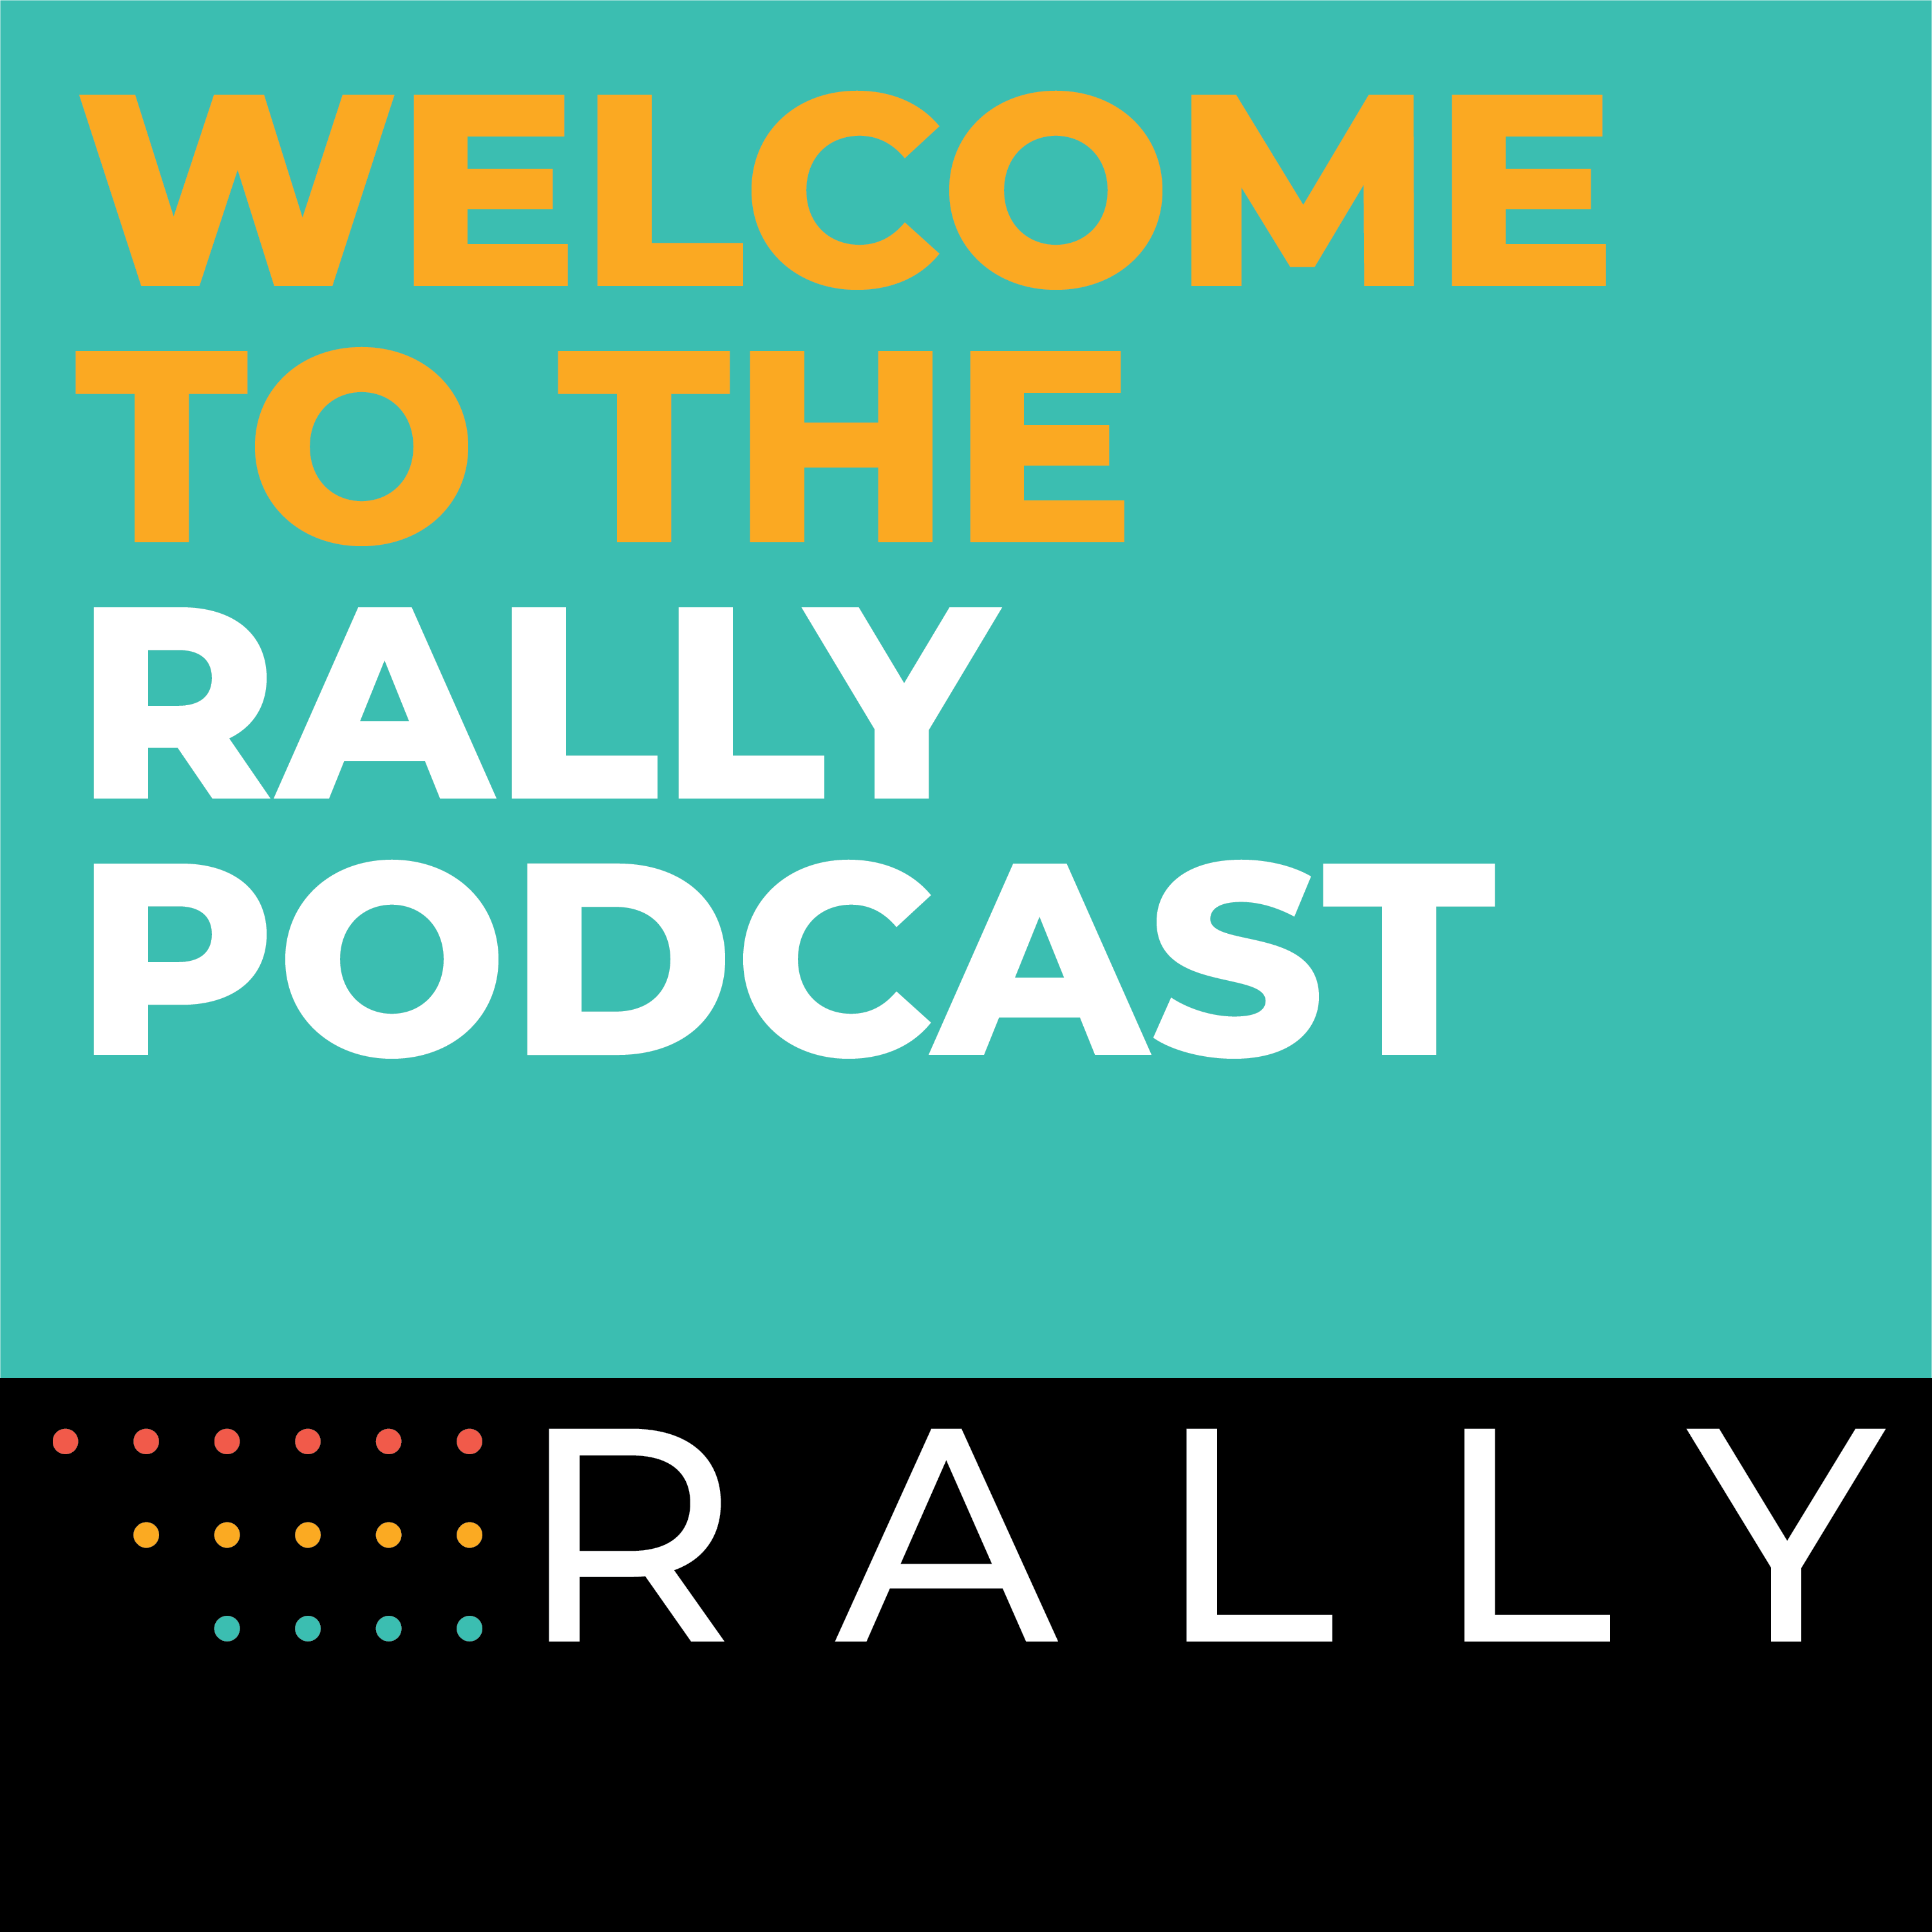 The Rally Podcast - Cultivating community through creativity.